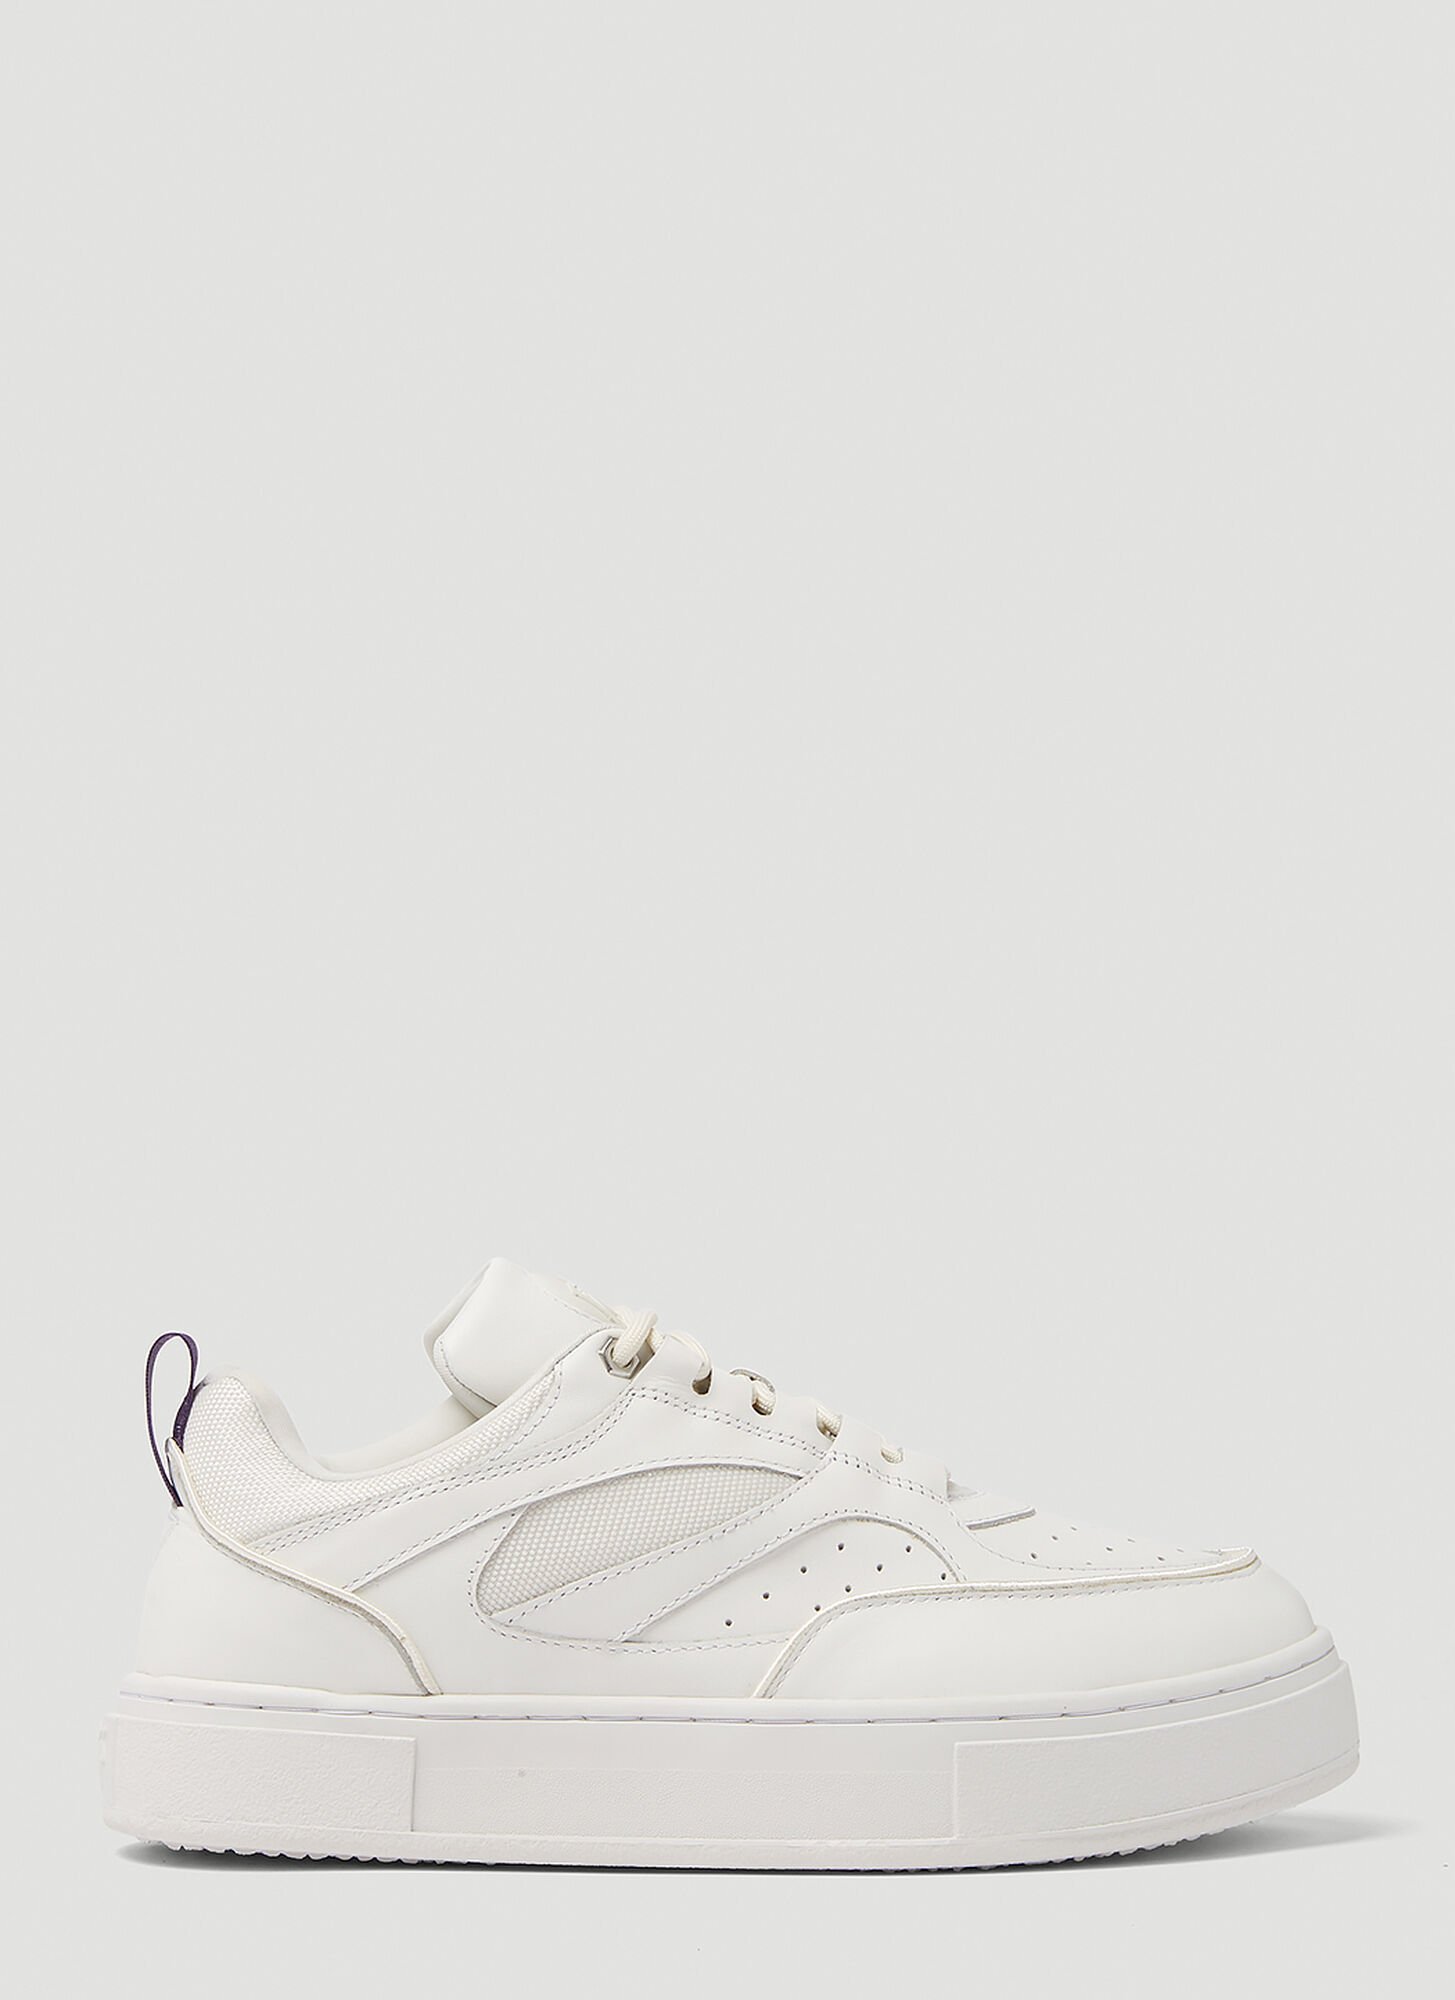 Eytys Sidney Low-top Sneakers Unisex Whiteunisex